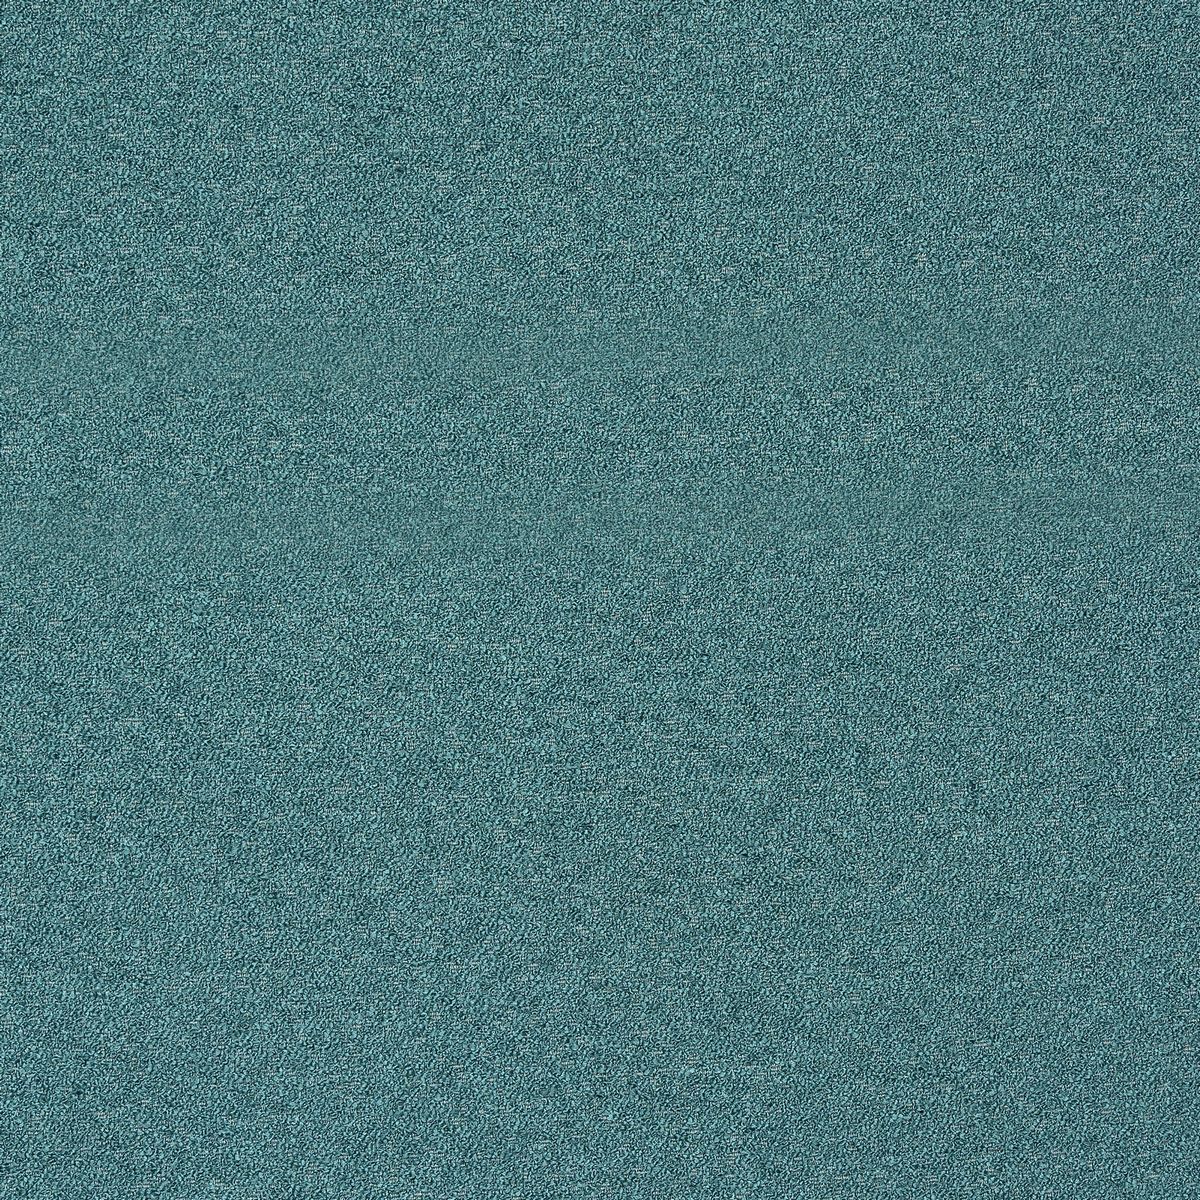 Lux Boucle Teal Fabric by Porter & Stone